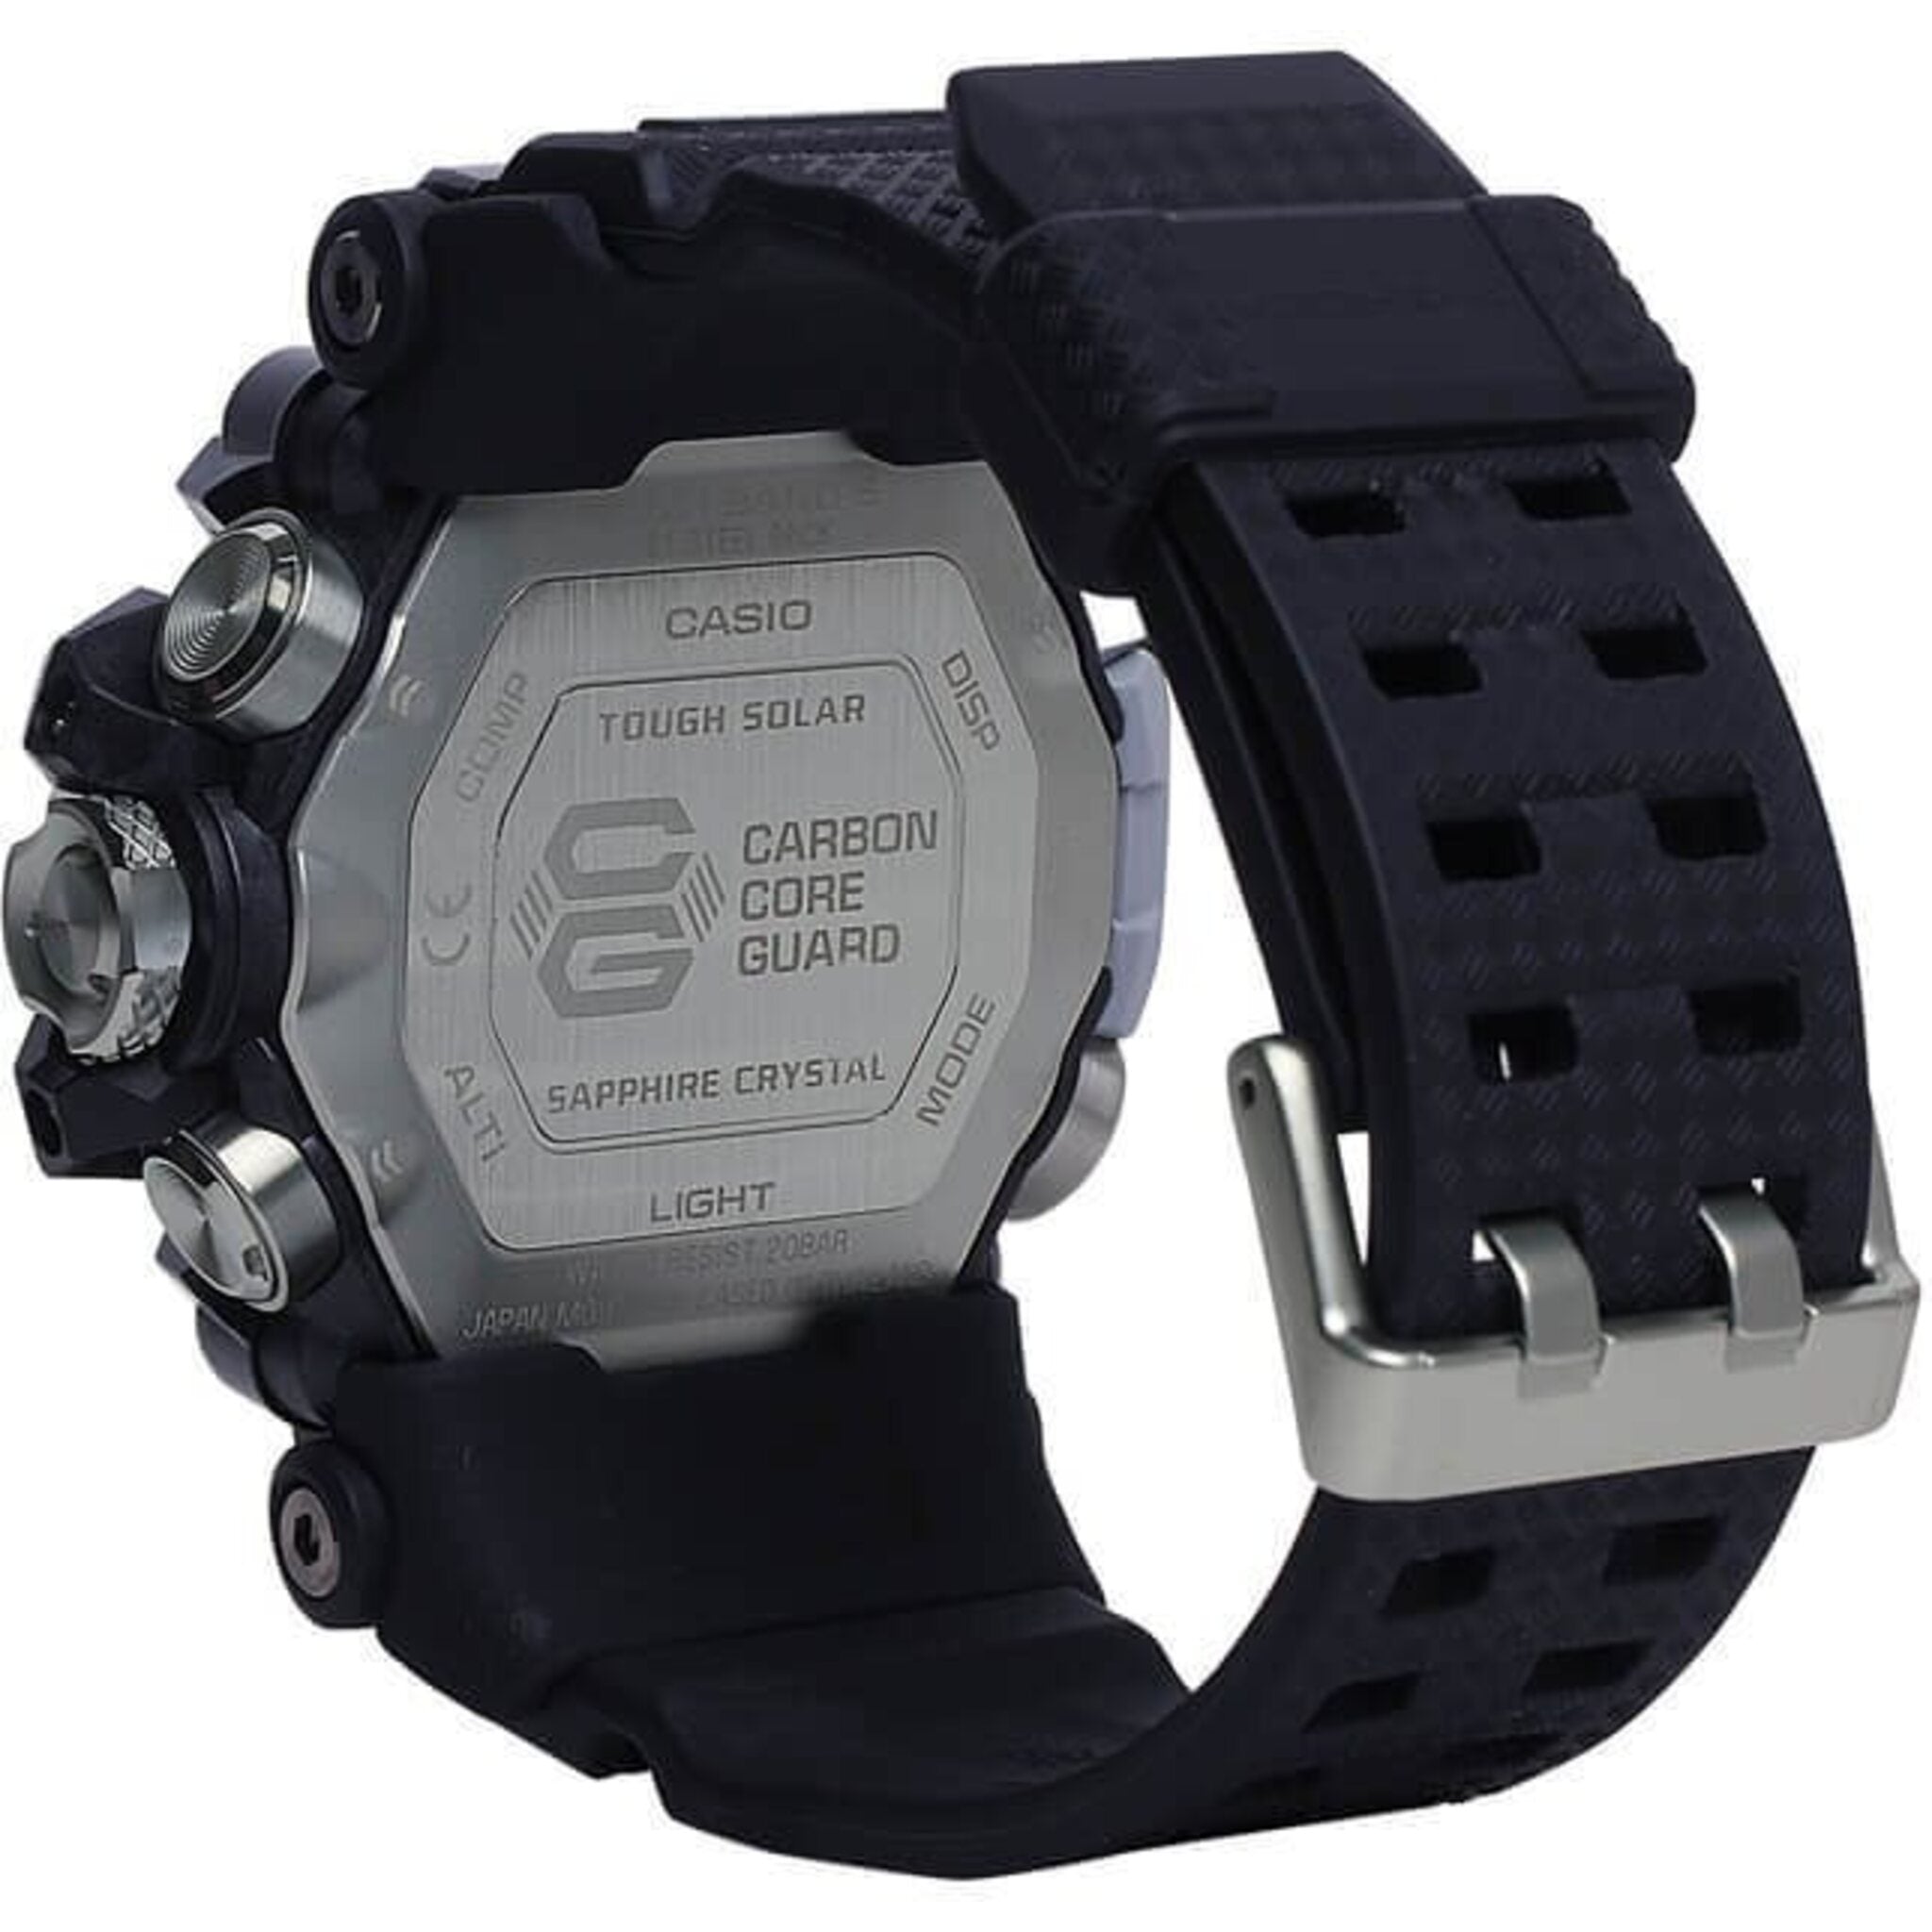 Metal Injection Moulding used in Casio's flagship G-Shock Mudmaster watch